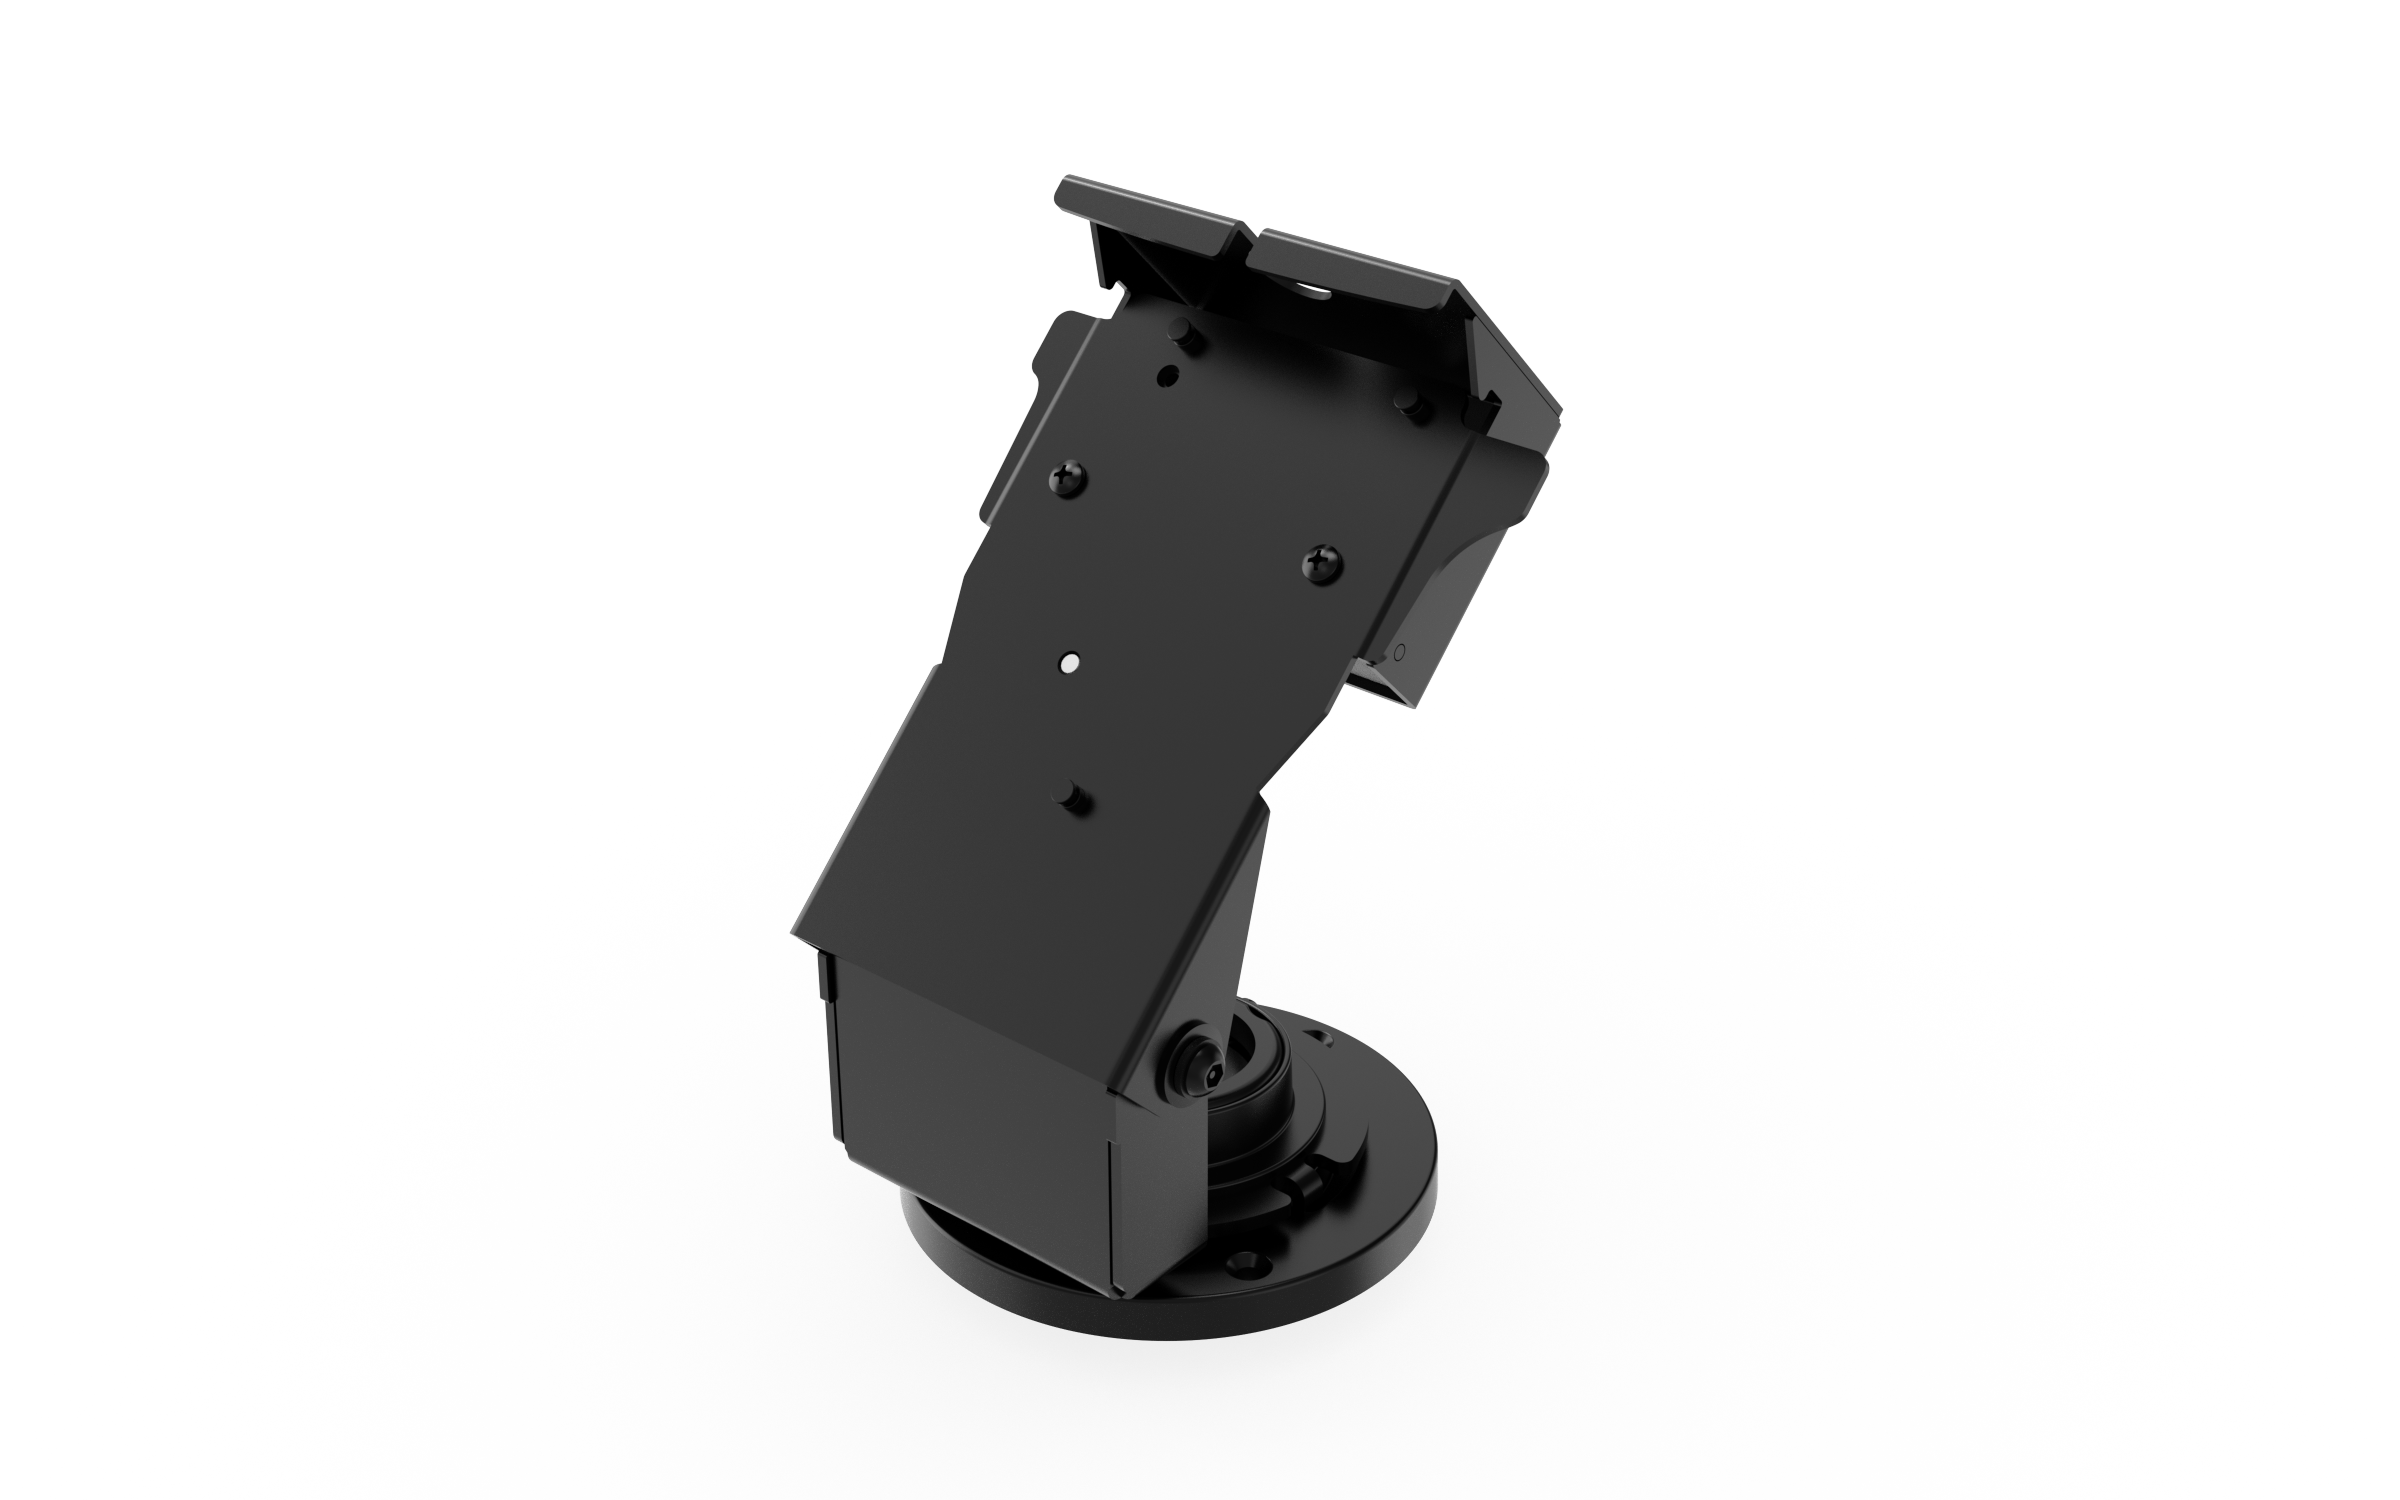 Round Base Metal Locking Stand with EMV Card Clearance for Verifone M424 Payment Terminals